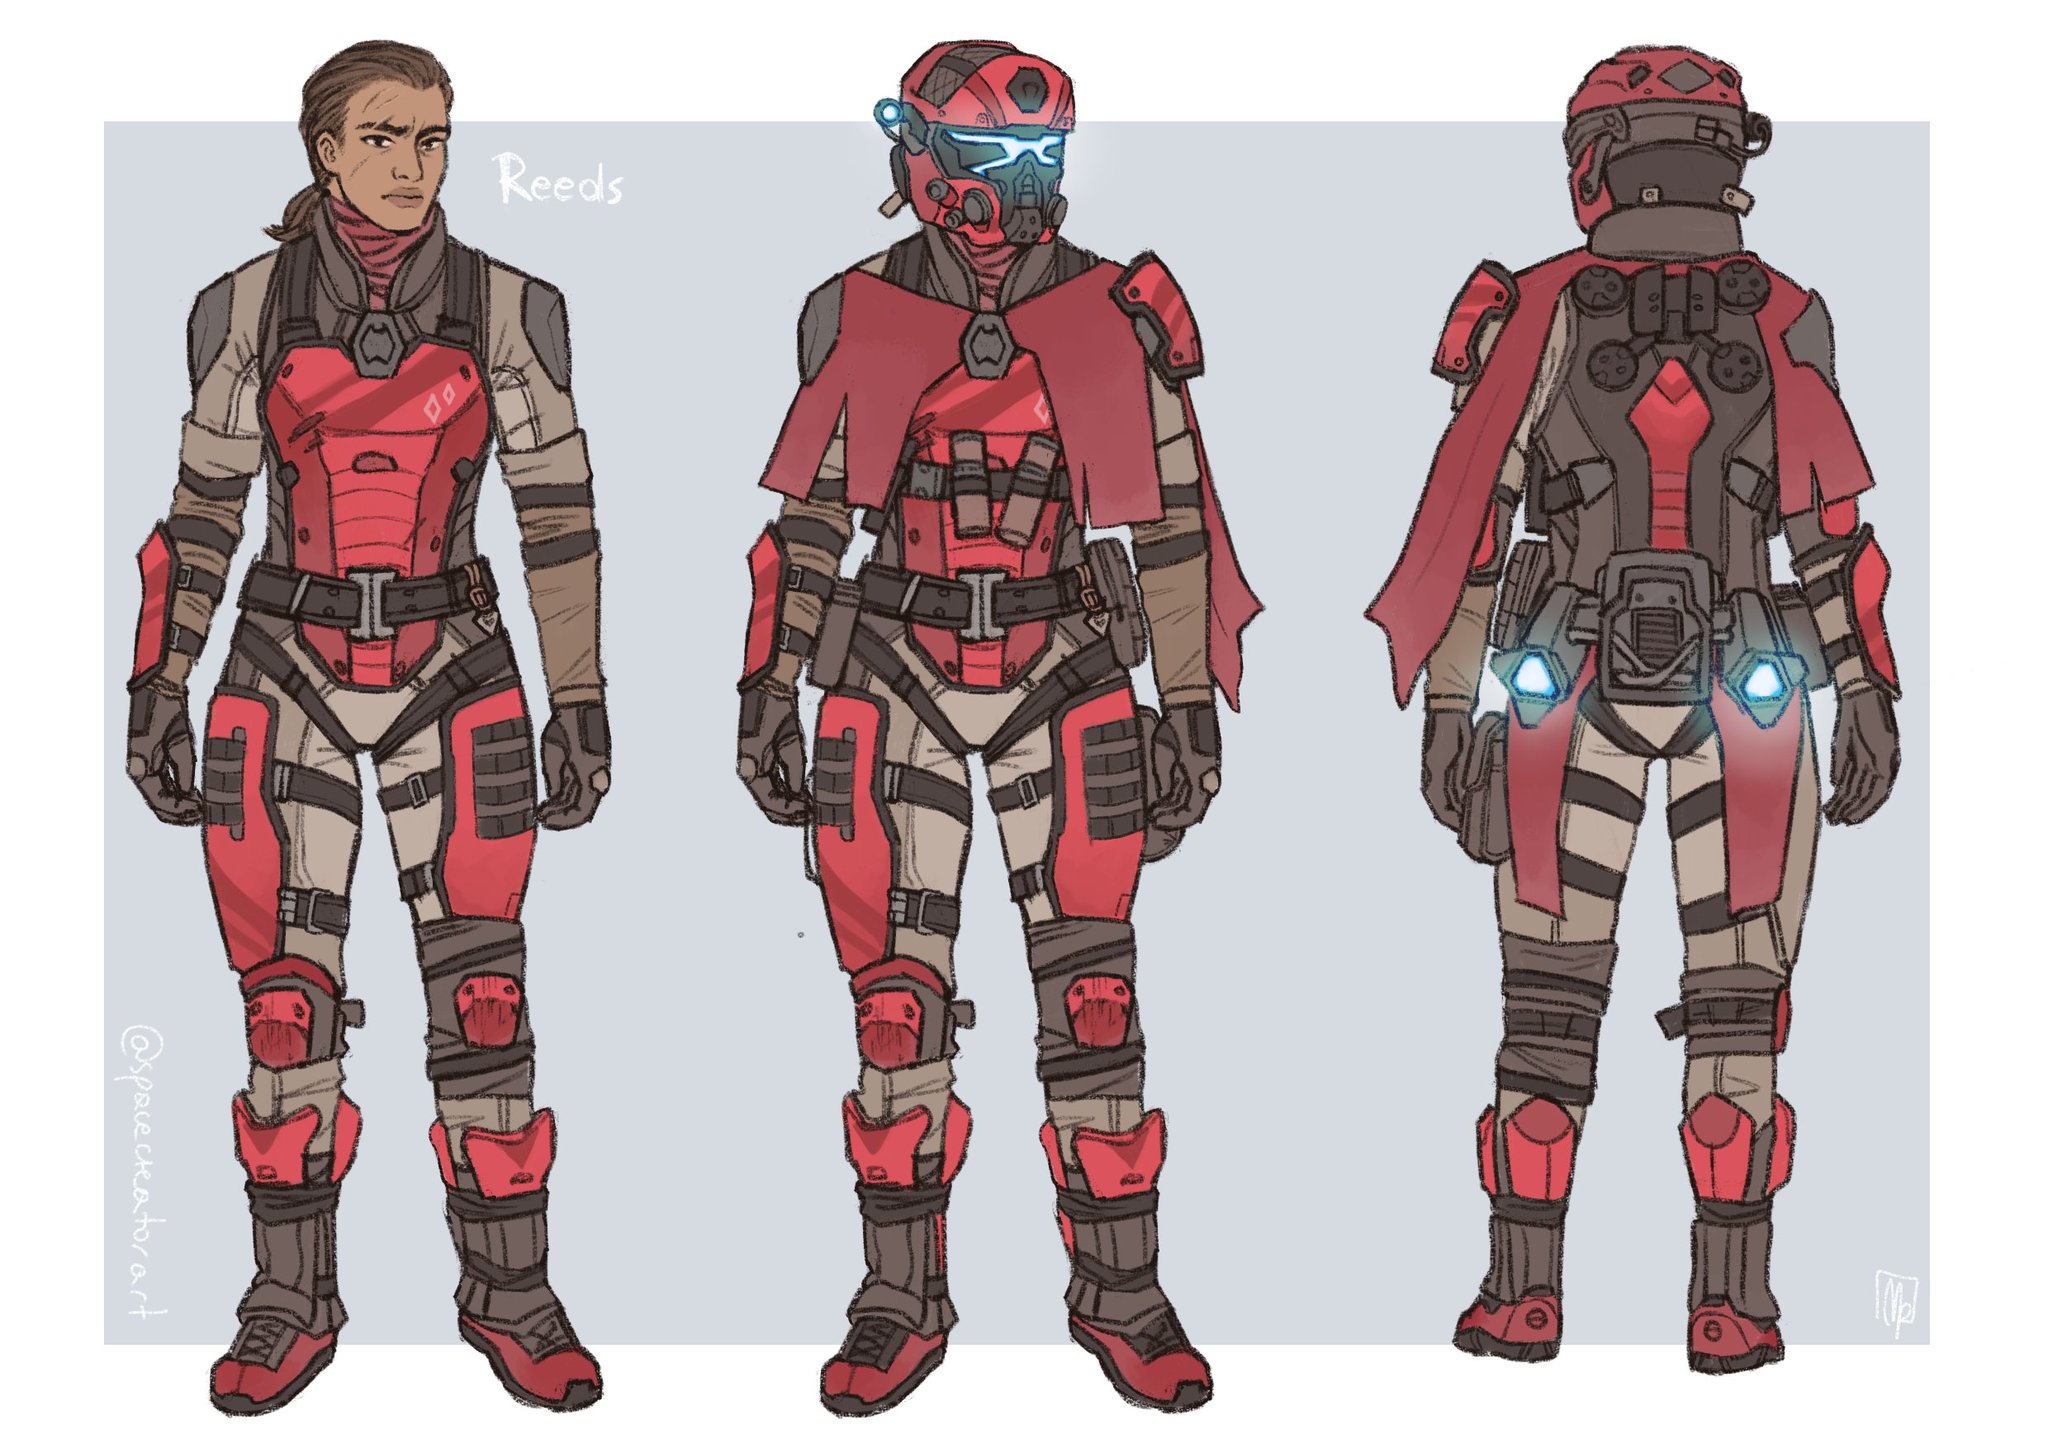 “Working on a new OC, making a bit more personalised pilot gear.” 